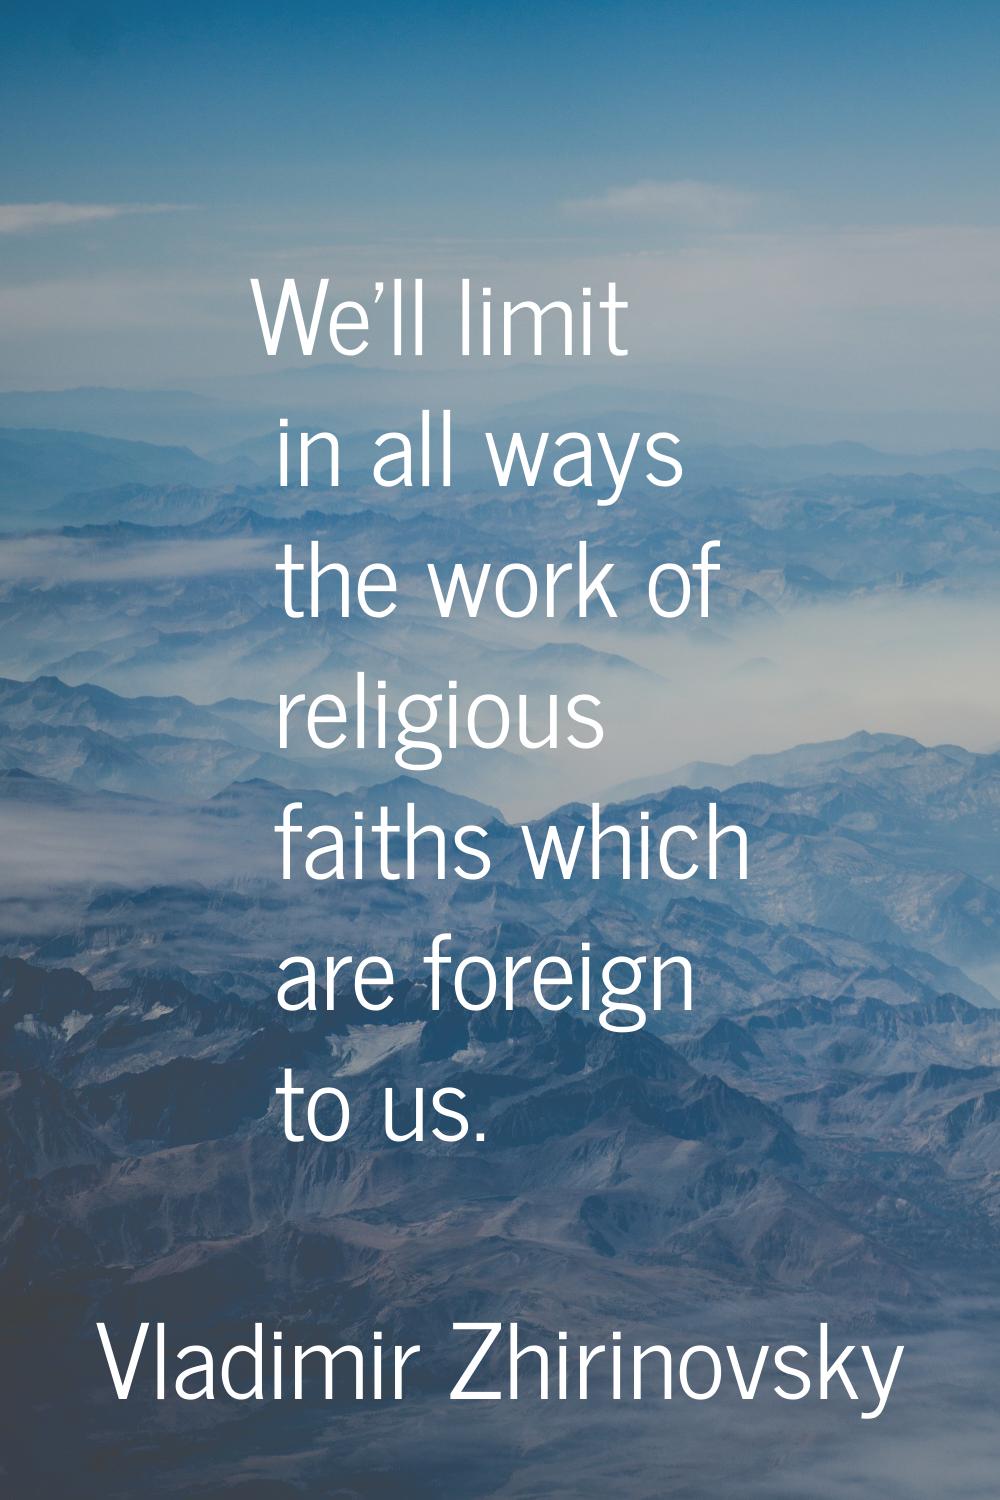 We'll limit in all ways the work of religious faiths which are foreign to us.